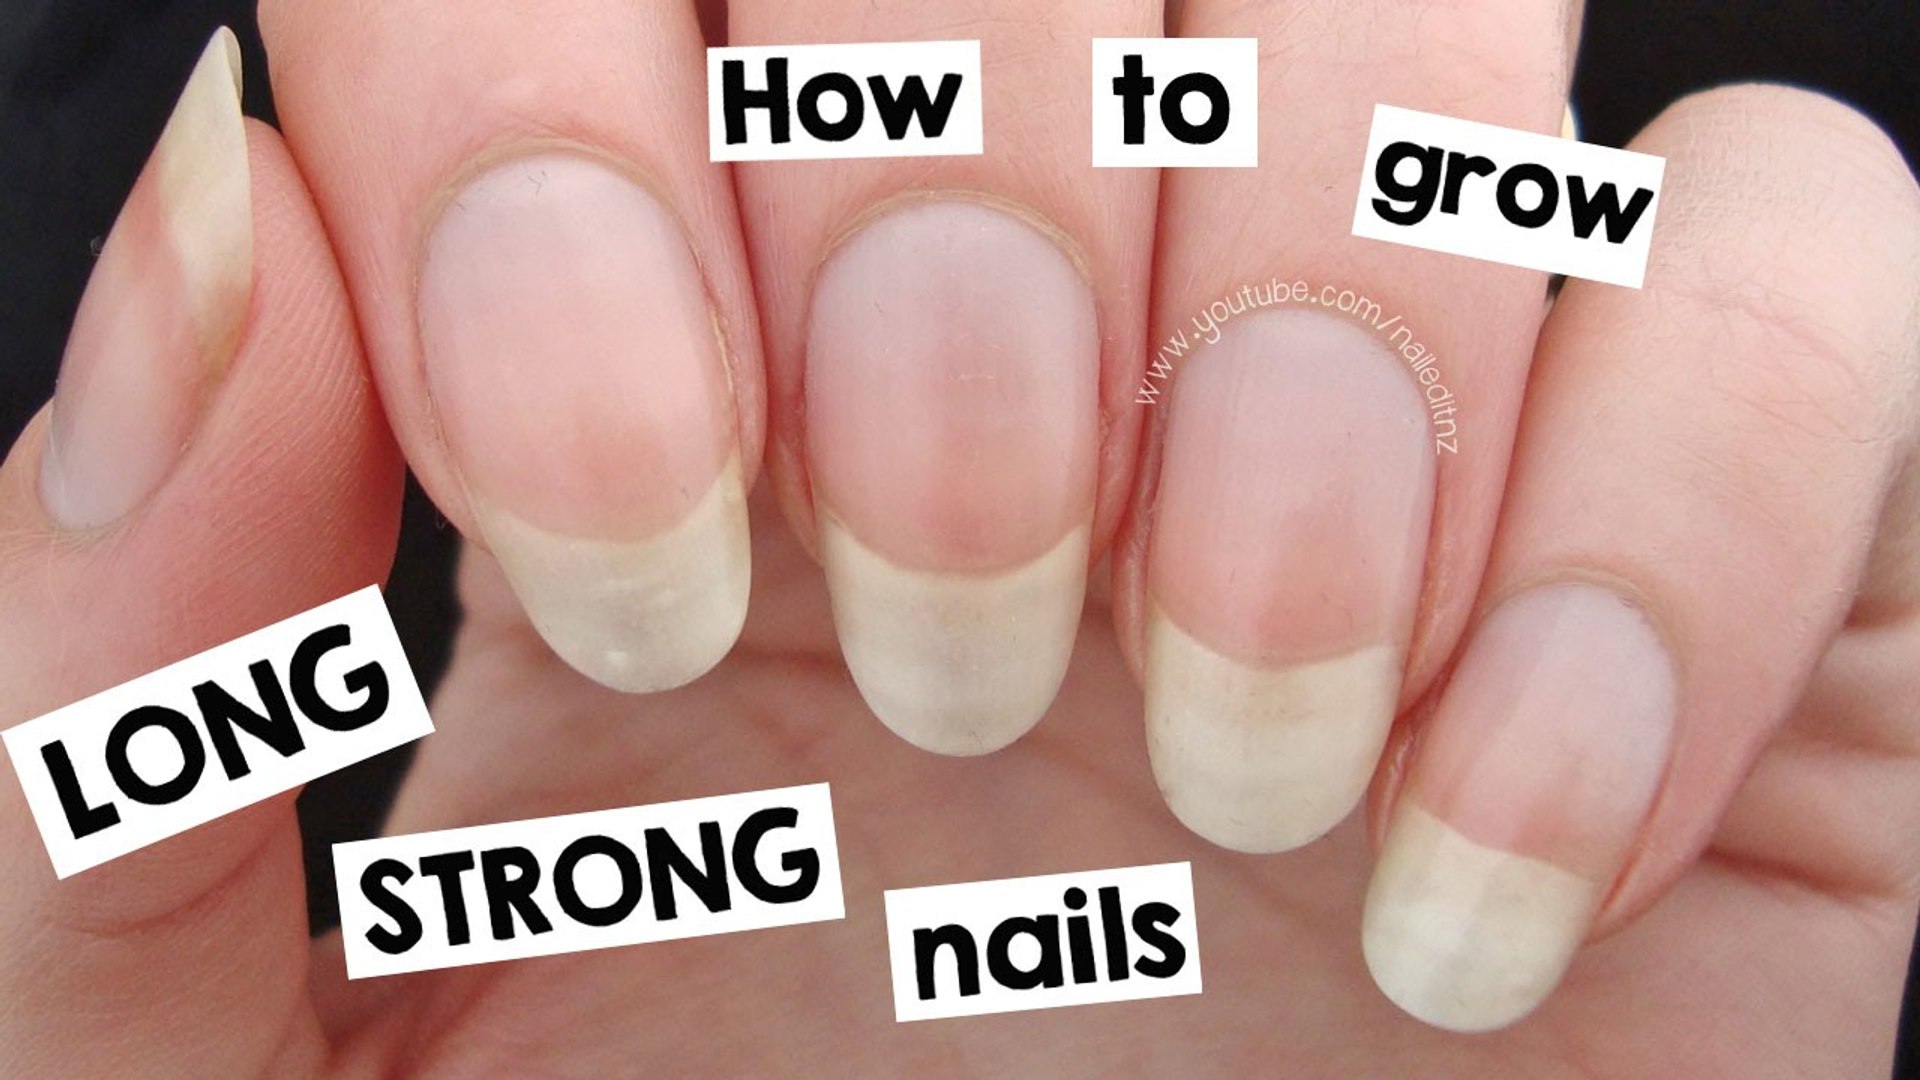 How to Grow Nails Faster Naturally - How to grow stronger nails naturally -  Home Remedies for Nail Growth - Make your Nails grow faster and strong -  Make Nails Stronger 